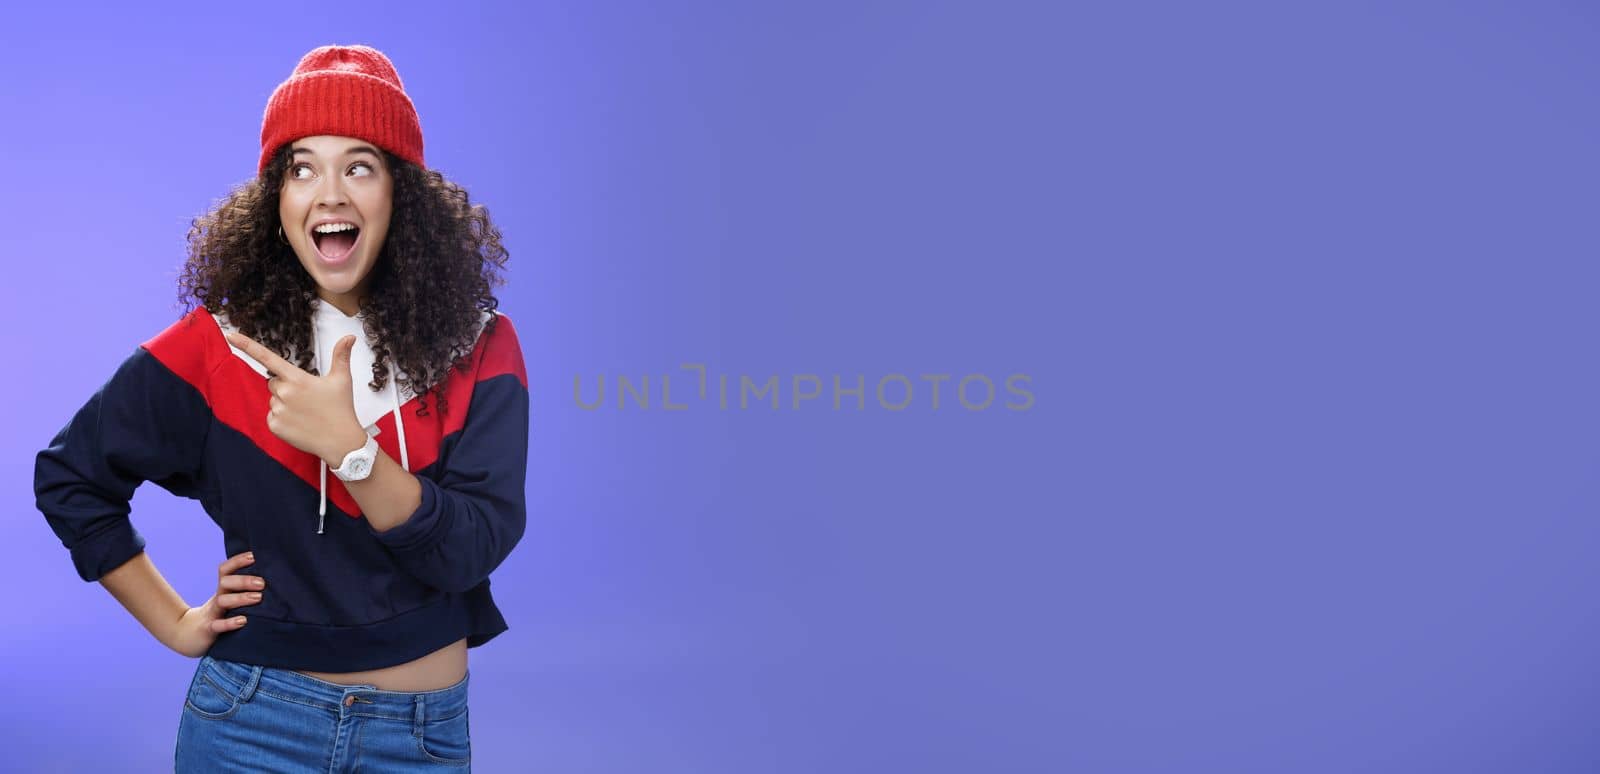 Cute and playful girl in winter stylish outfit and watch smiling broadly with excitement and joy pointing, looking at upper left corner thrilled and joyful as posing over blue background.